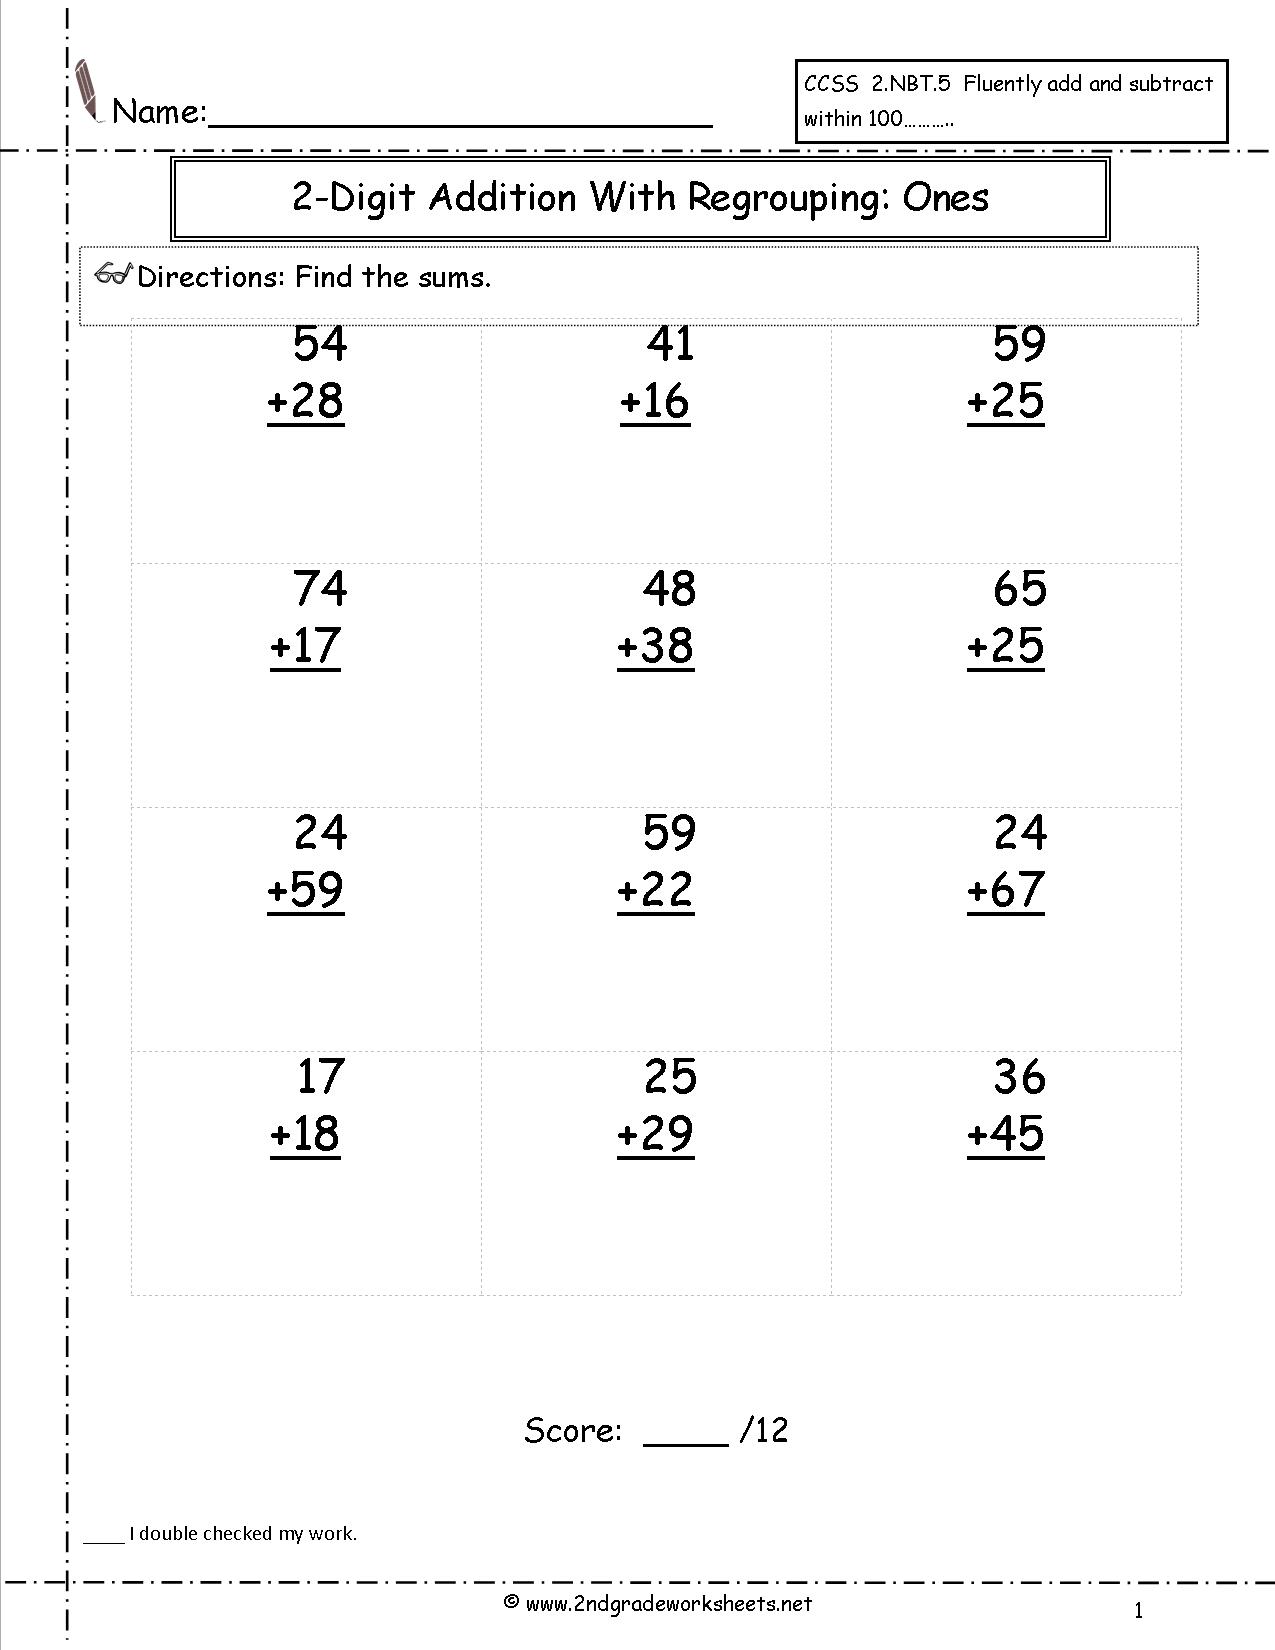 2-Digit Addition Regrouping Worksheets Image